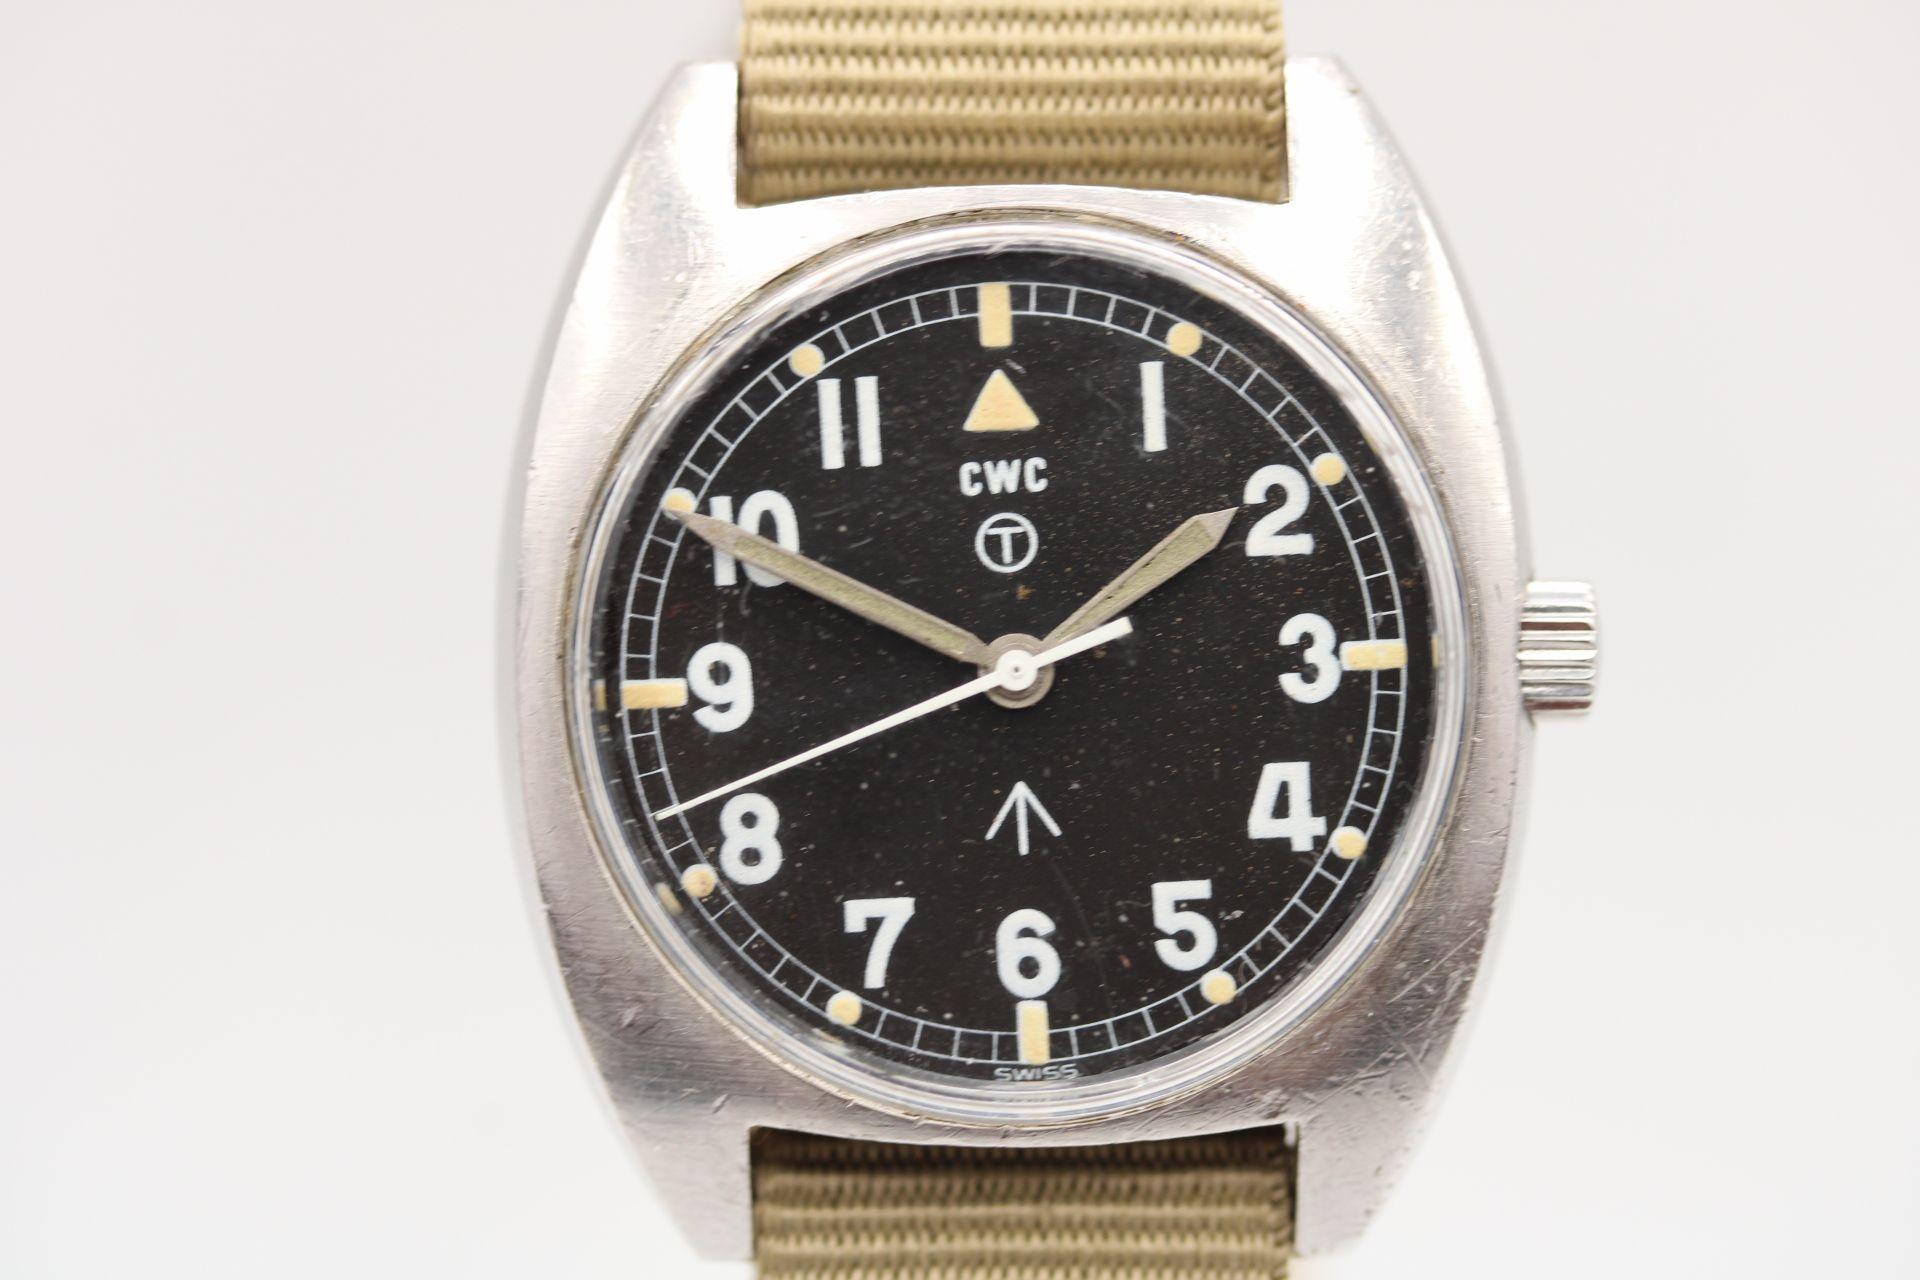 An original British Military watch for ridiculously small amount of money, this CWC W10 from 1977 would have been issued to the British Military having been launched in the early 70's.

A manual wind movement that provides a power reserve of up to